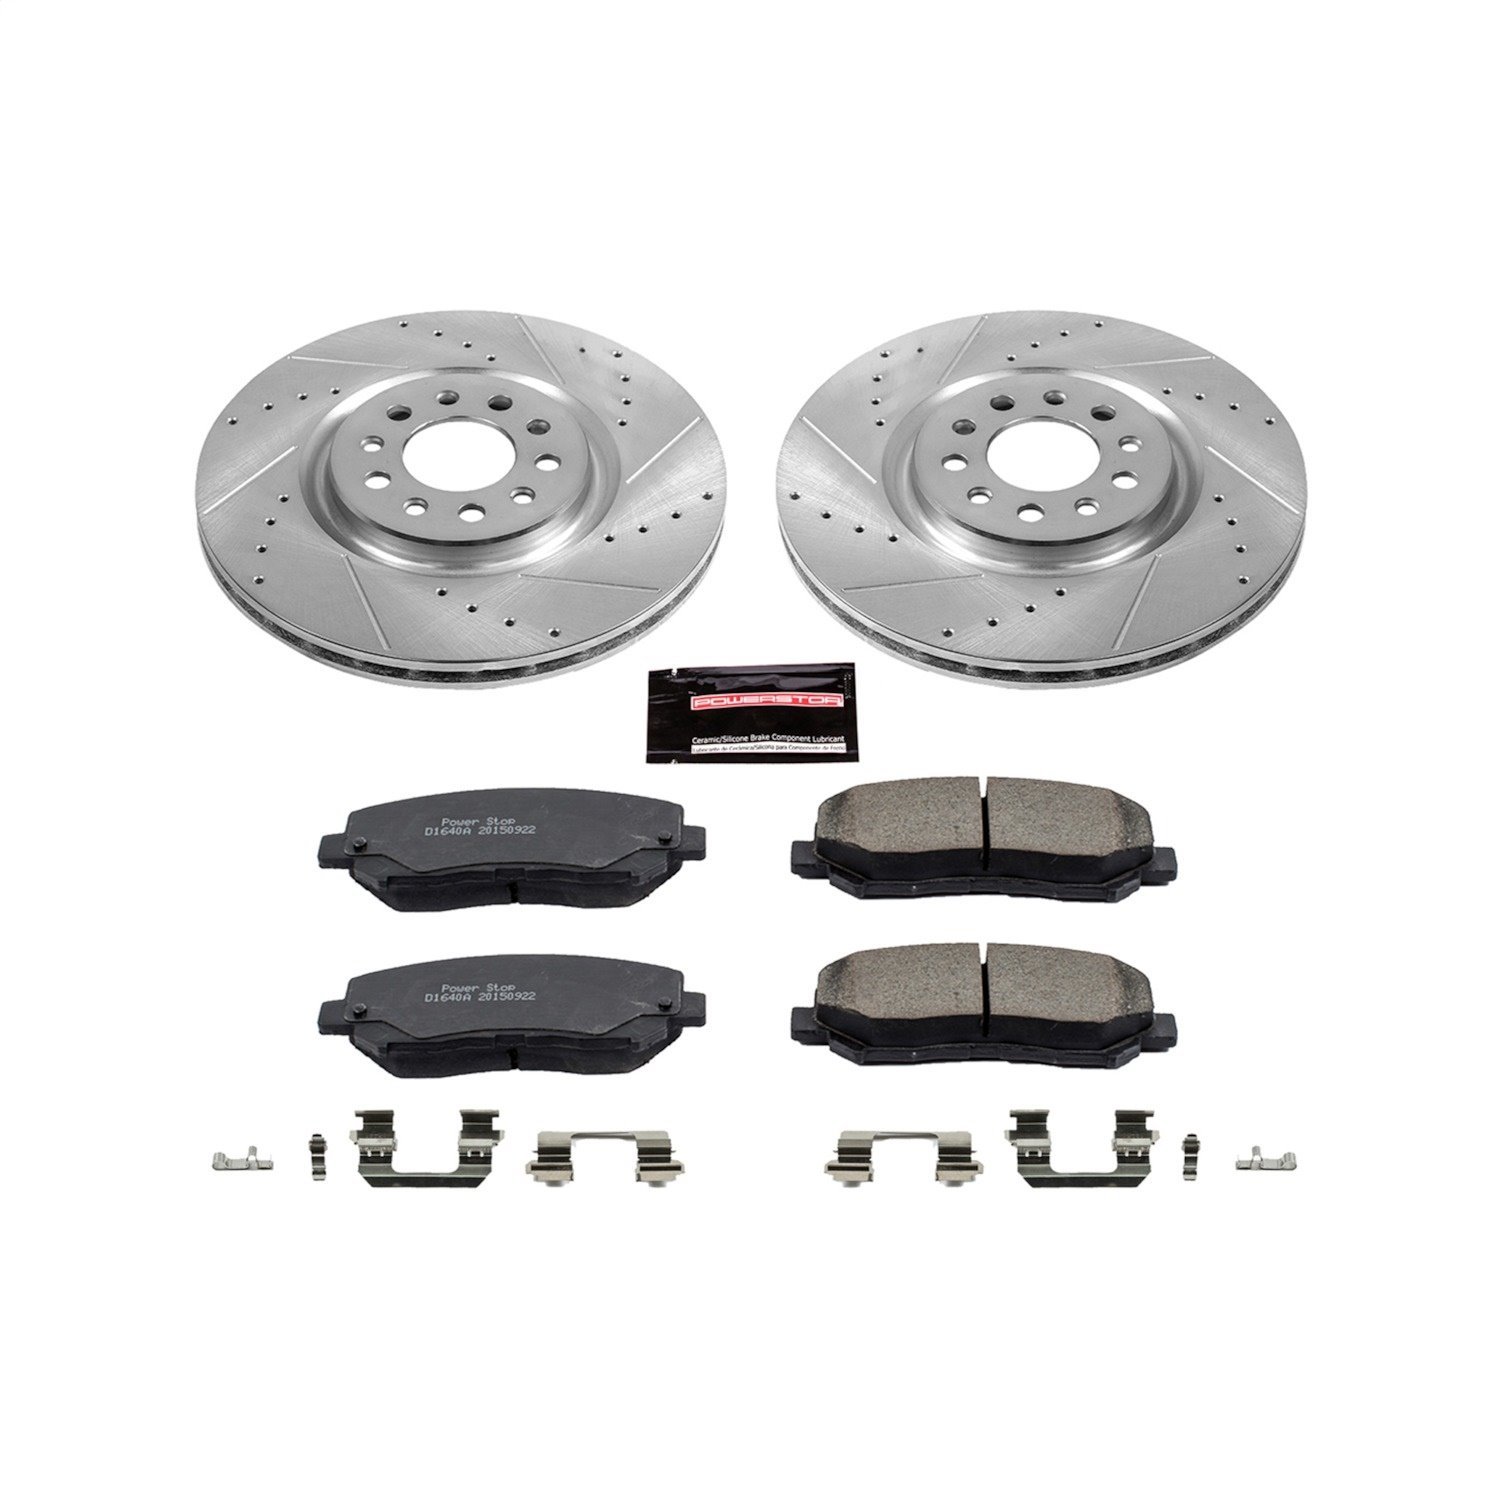 Z23 Front Brake Pads and Rotor Kit Fits